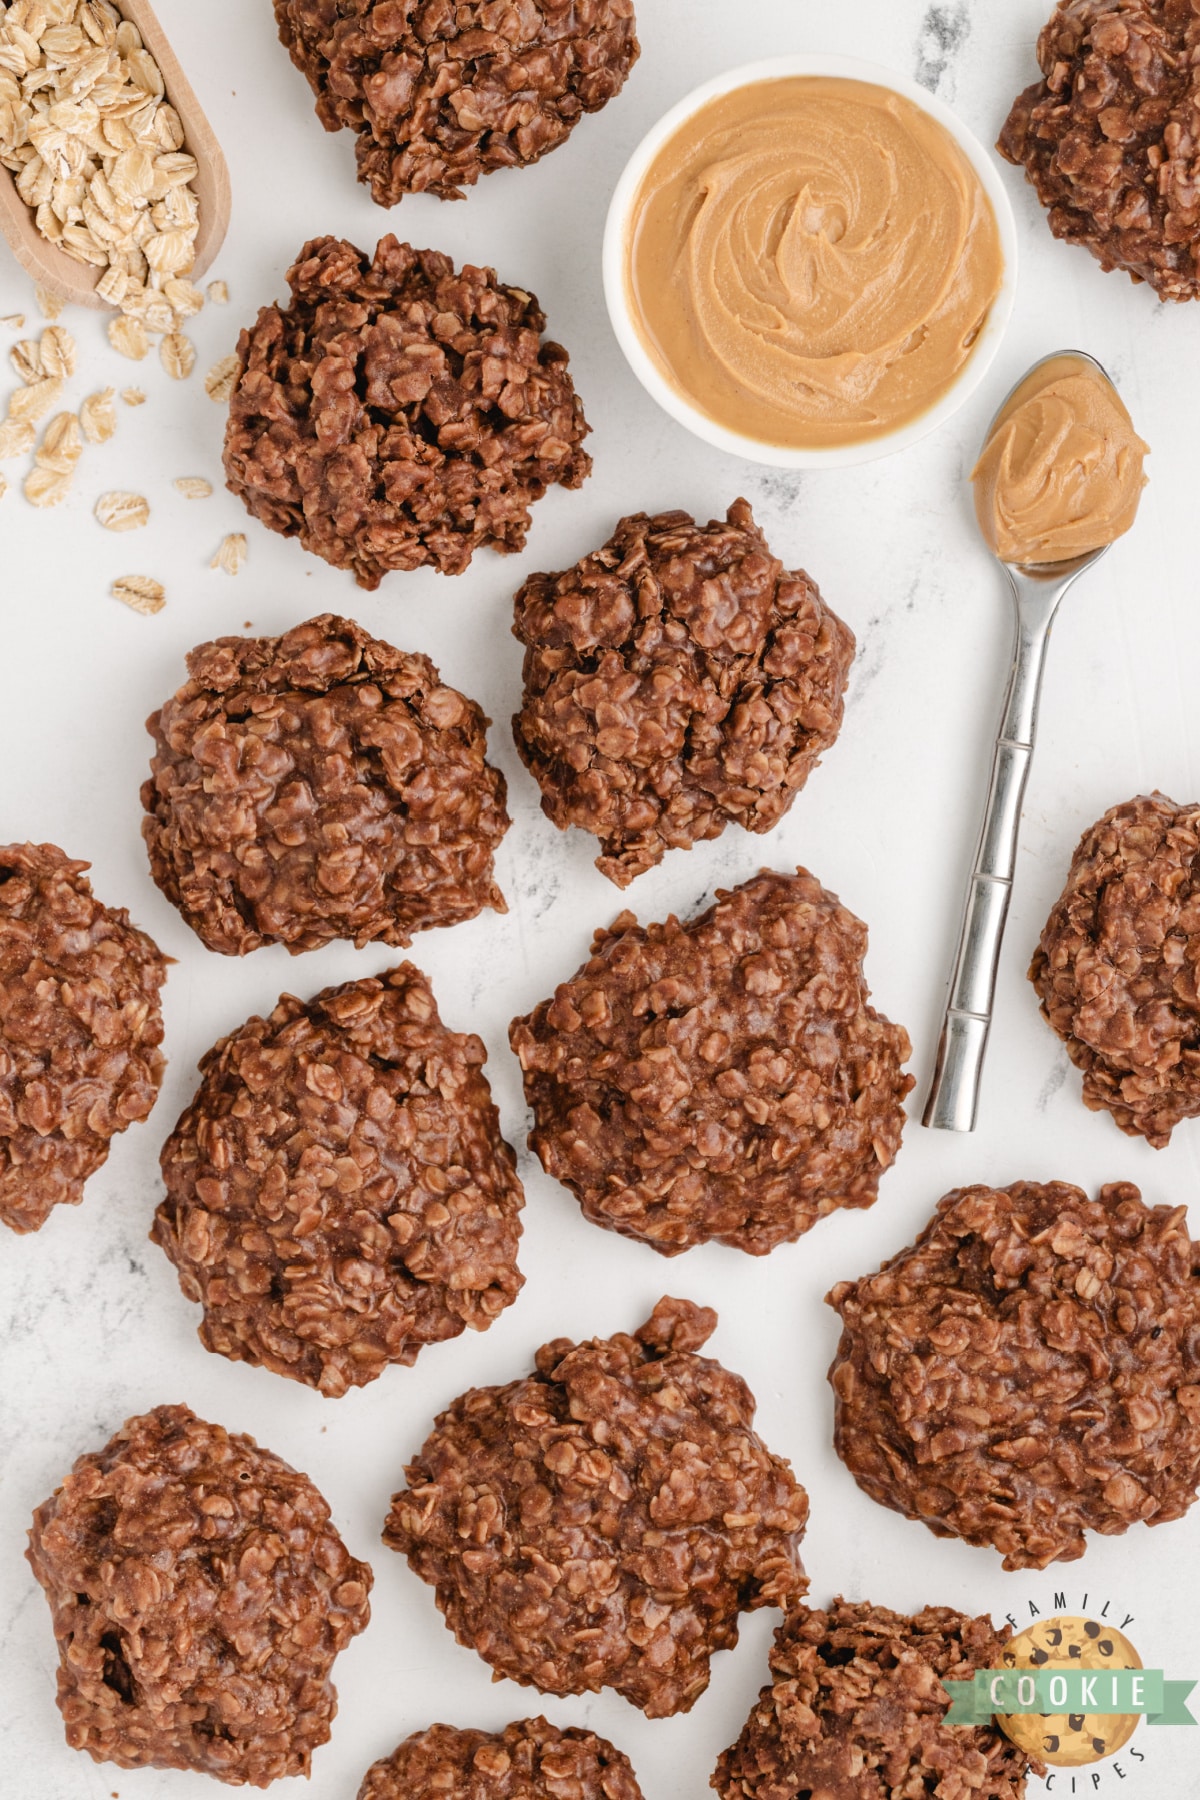 Microwave No-Bake Cookies are made with only six ingredients in less than 10 minutes, and no stove is necessary. Delicious no-bake cookie recipe made with oats, peanut butter, and cocoa powder. 